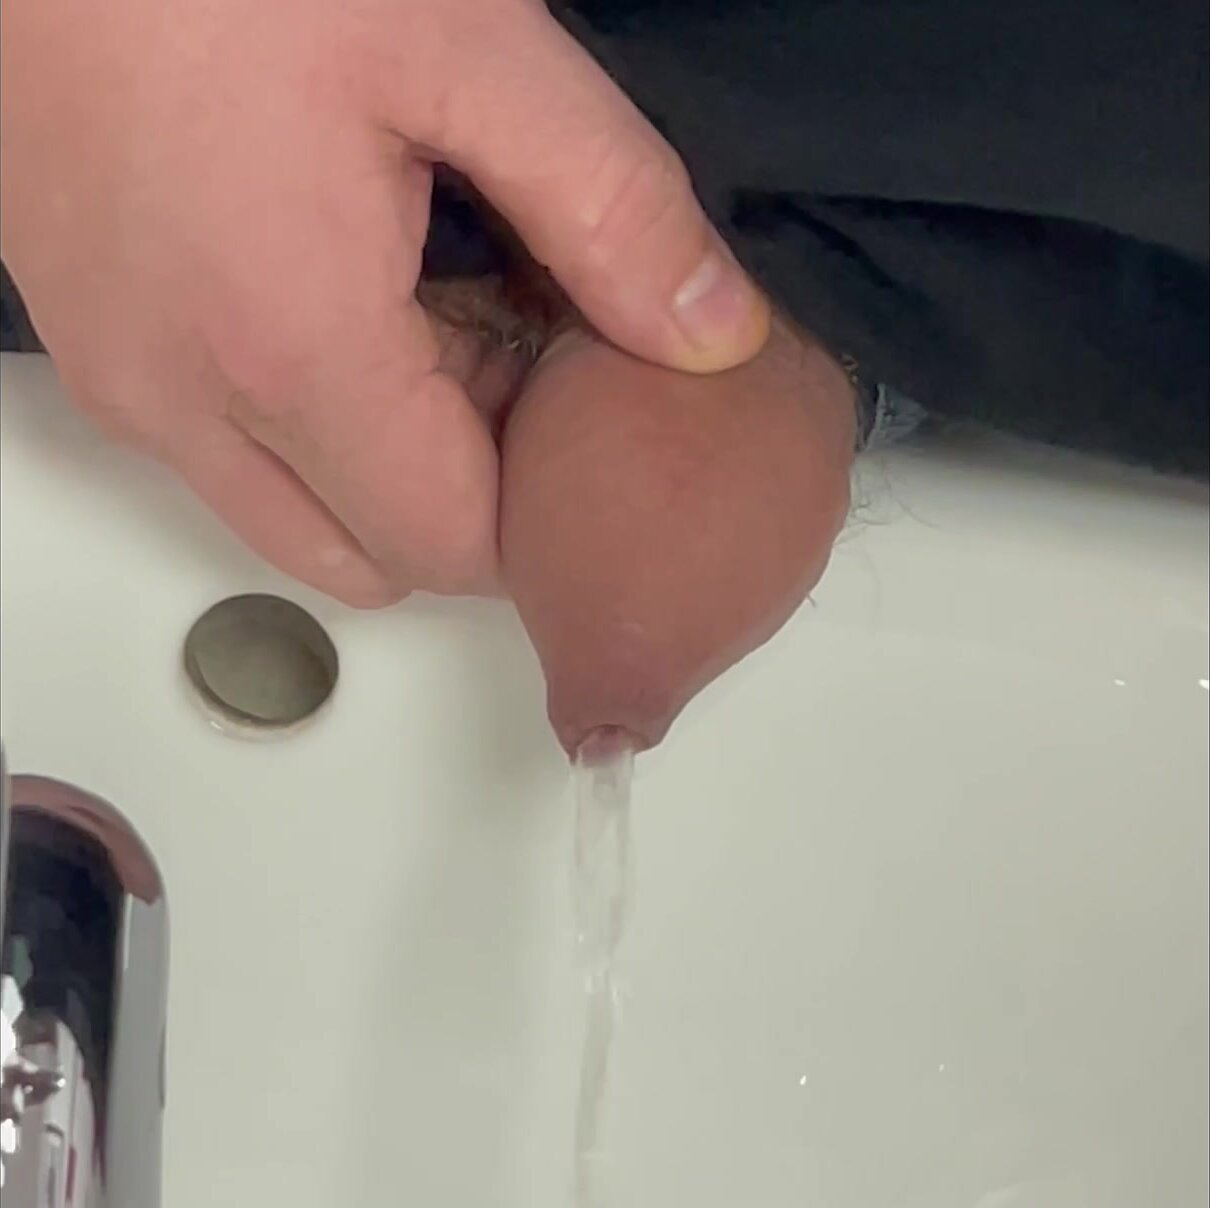 Peeing in a sink - video 2